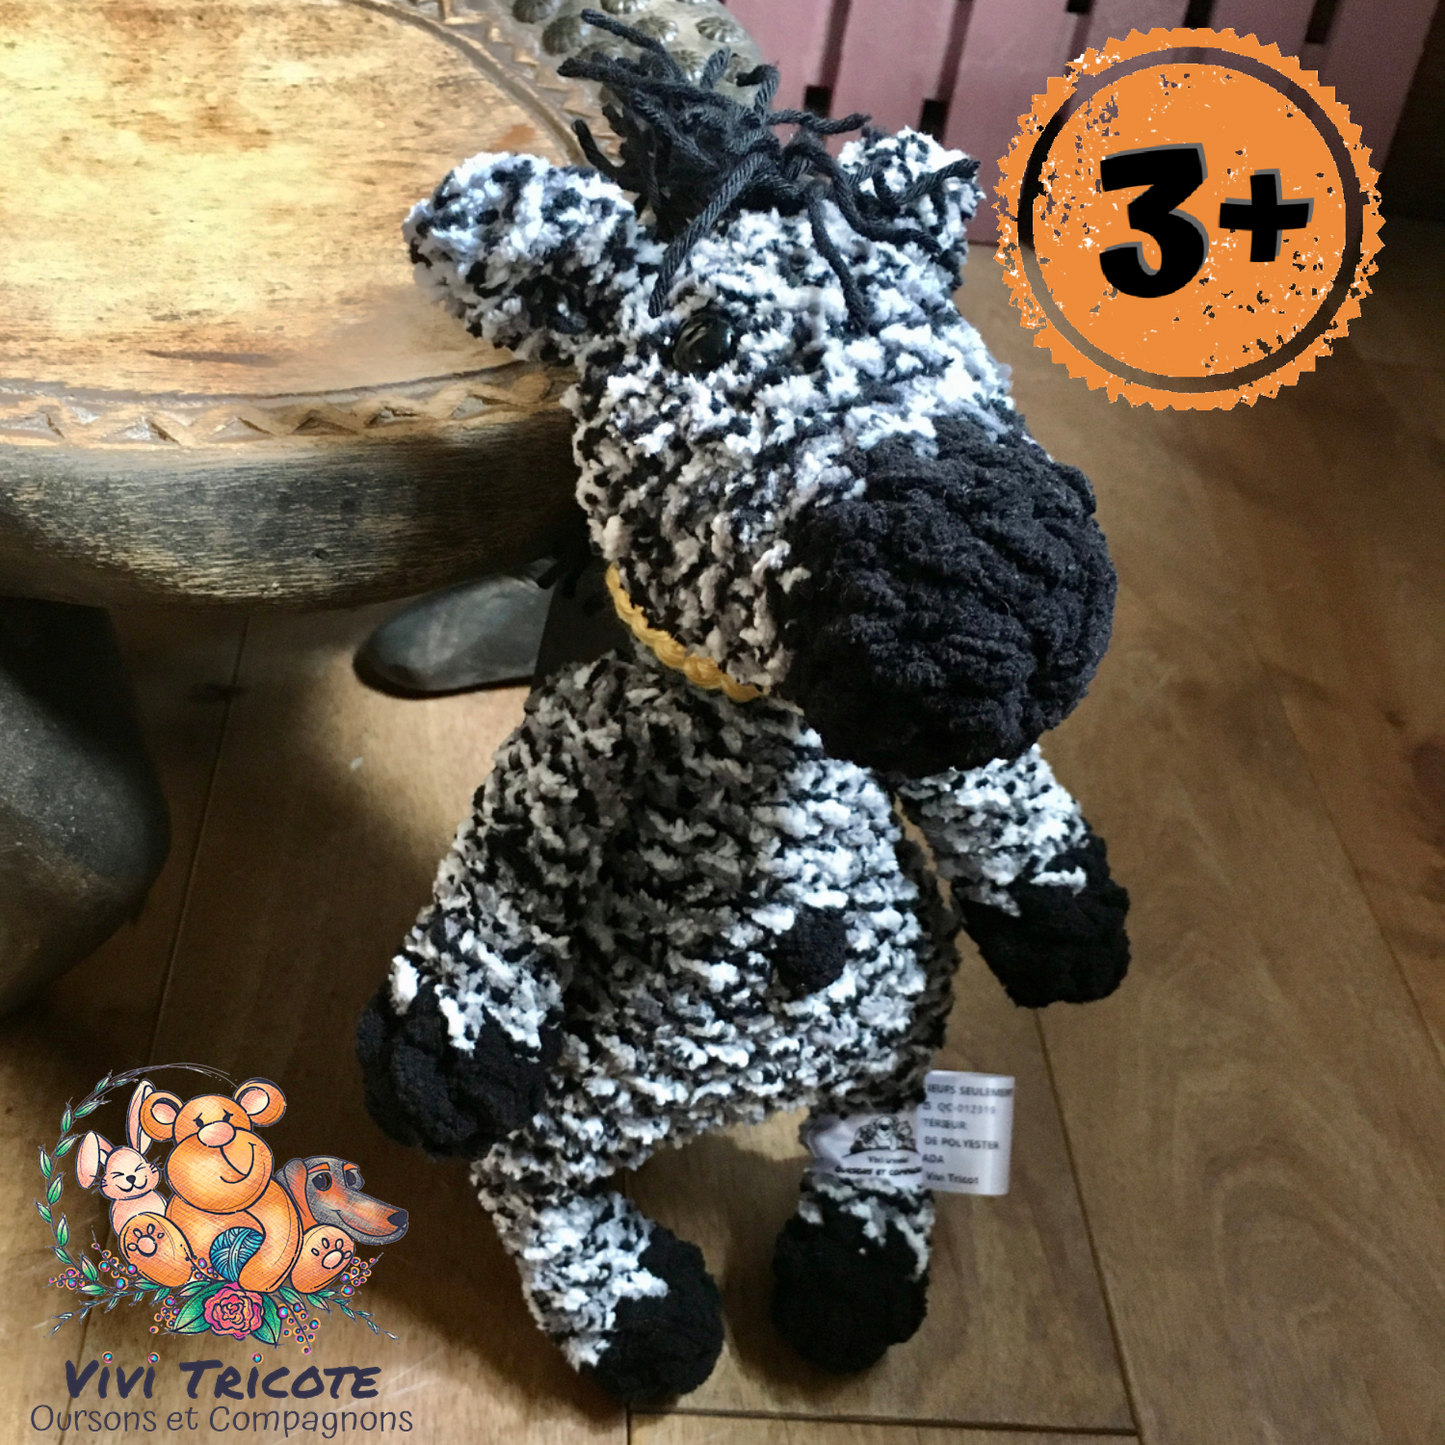 The little zebra with black eyes, ideal as a birth or birthday gift